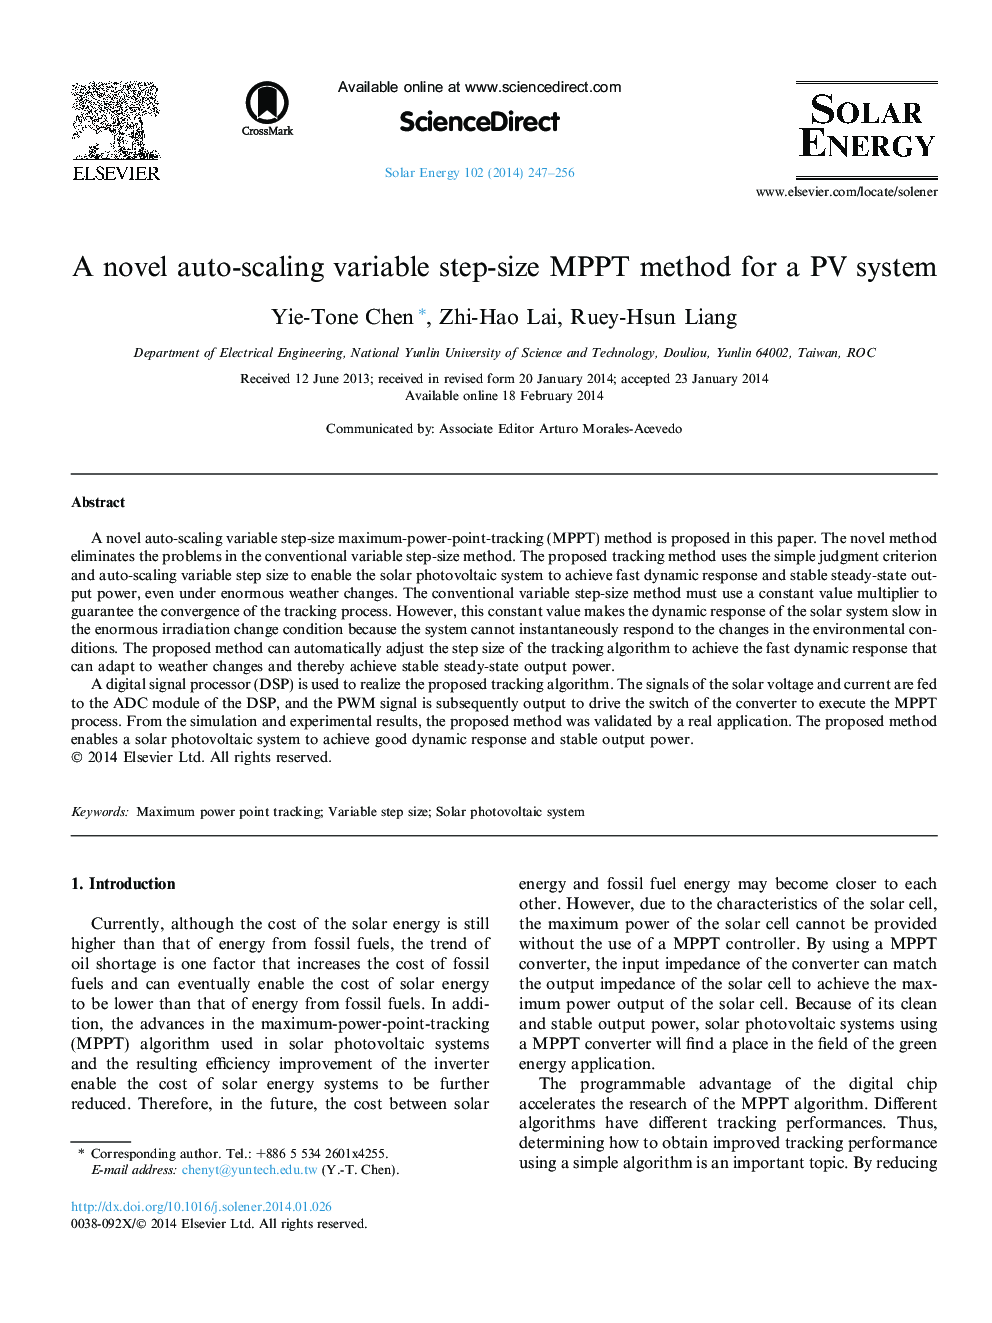 A novel auto-scaling variable step-size MPPT method for a PV system